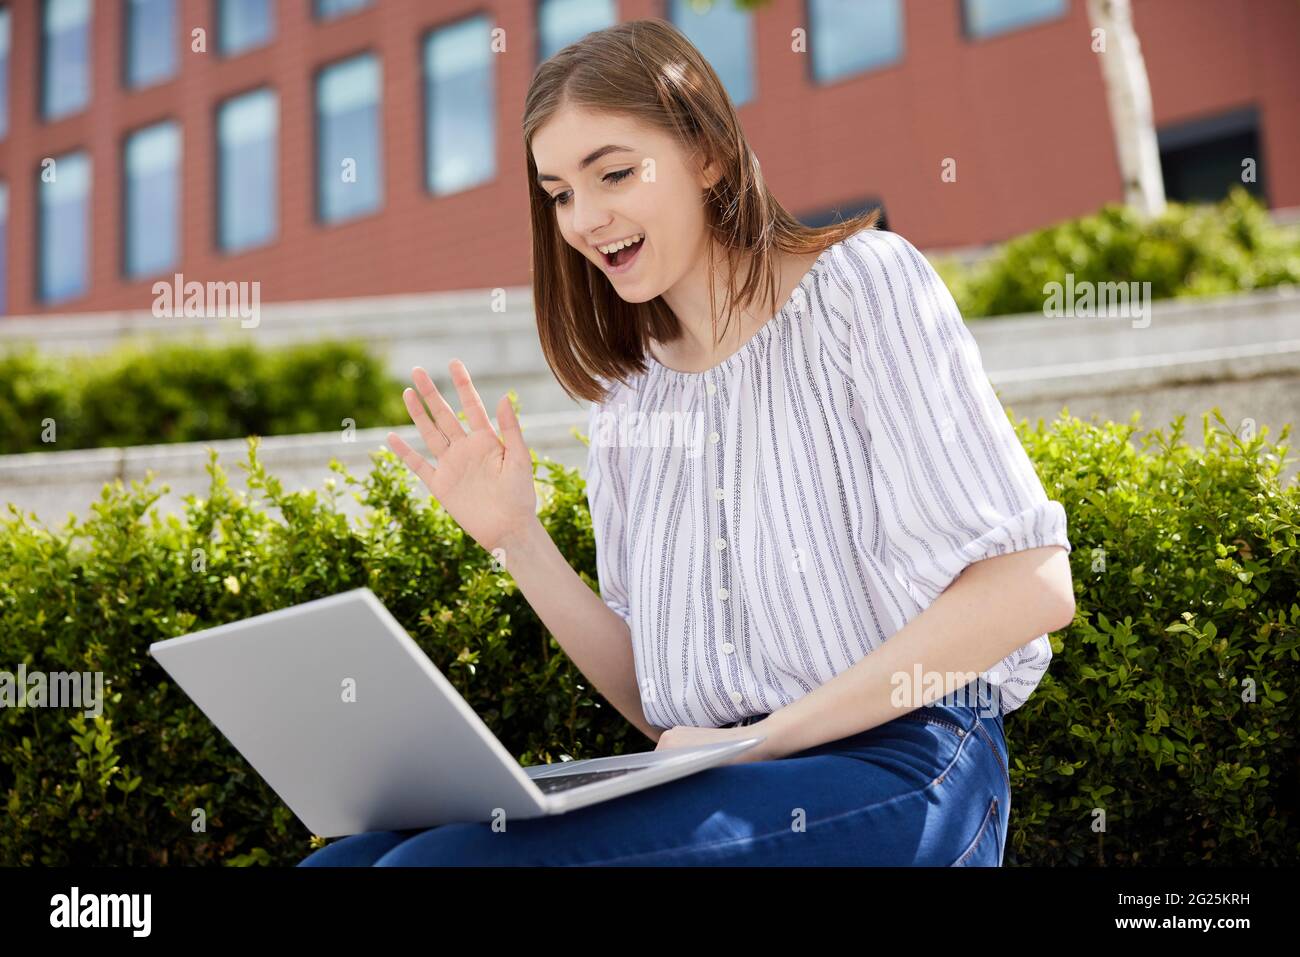 Young Female College Student OR Office Worker With Laptop Having Video Chat Outdoors On College Campus Stock Photo